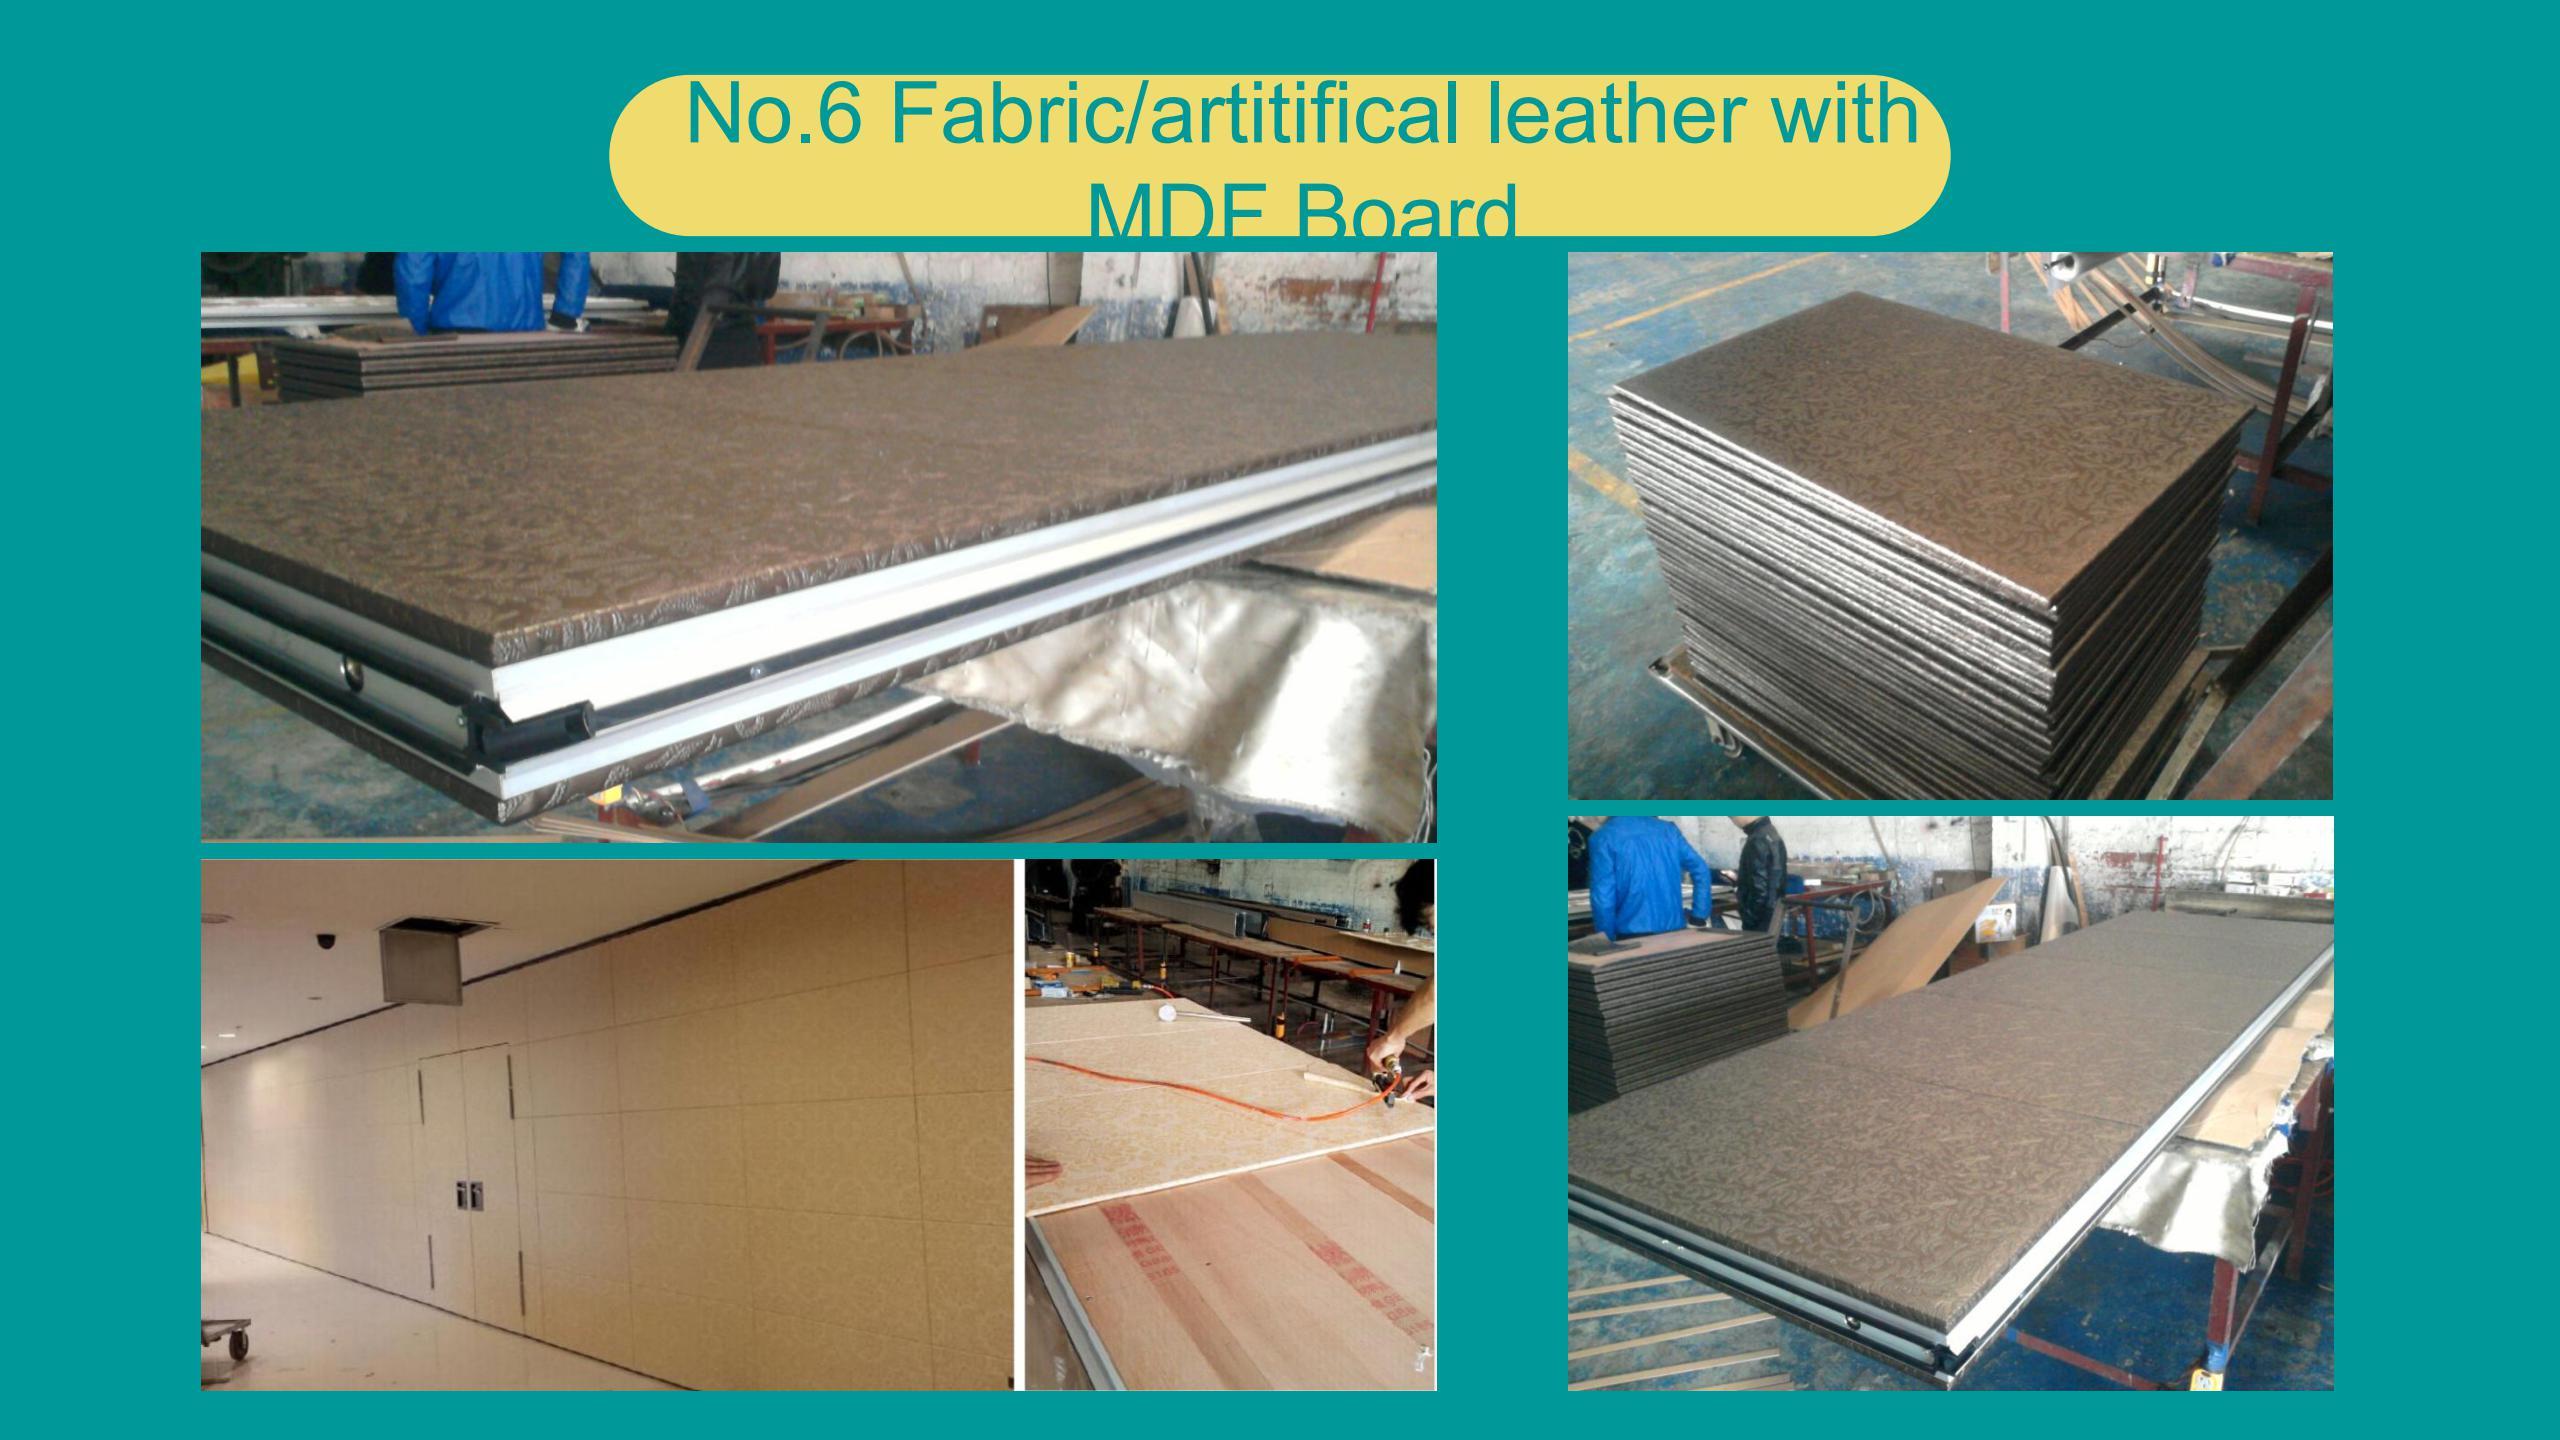 Fabric/artitifical leather with MDF Board